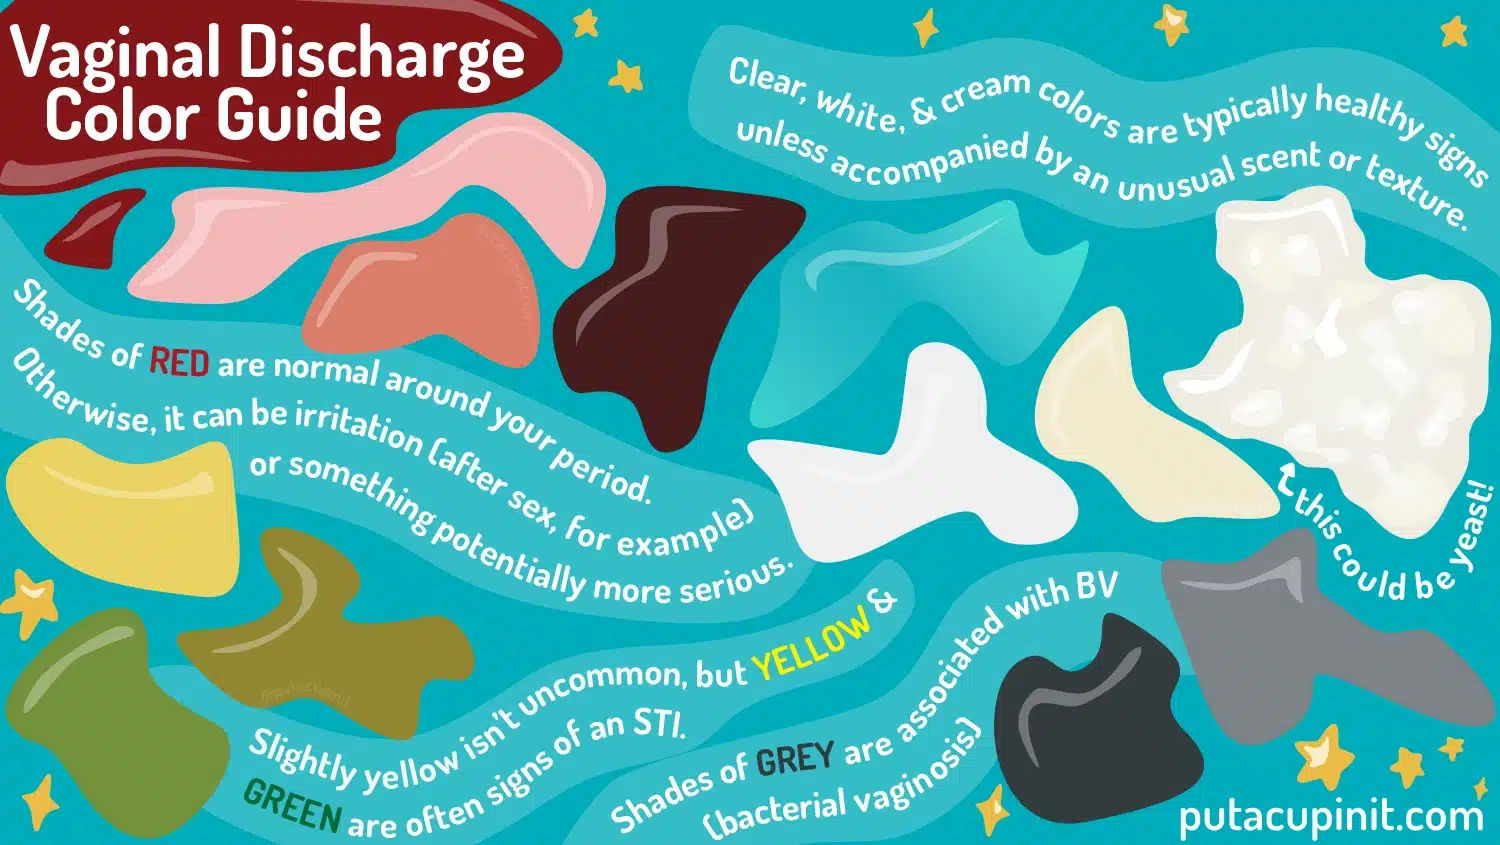 Vaginal Discharge  An Illustrated Guide To What's Normal & What's Not? -  Put A Cup In It